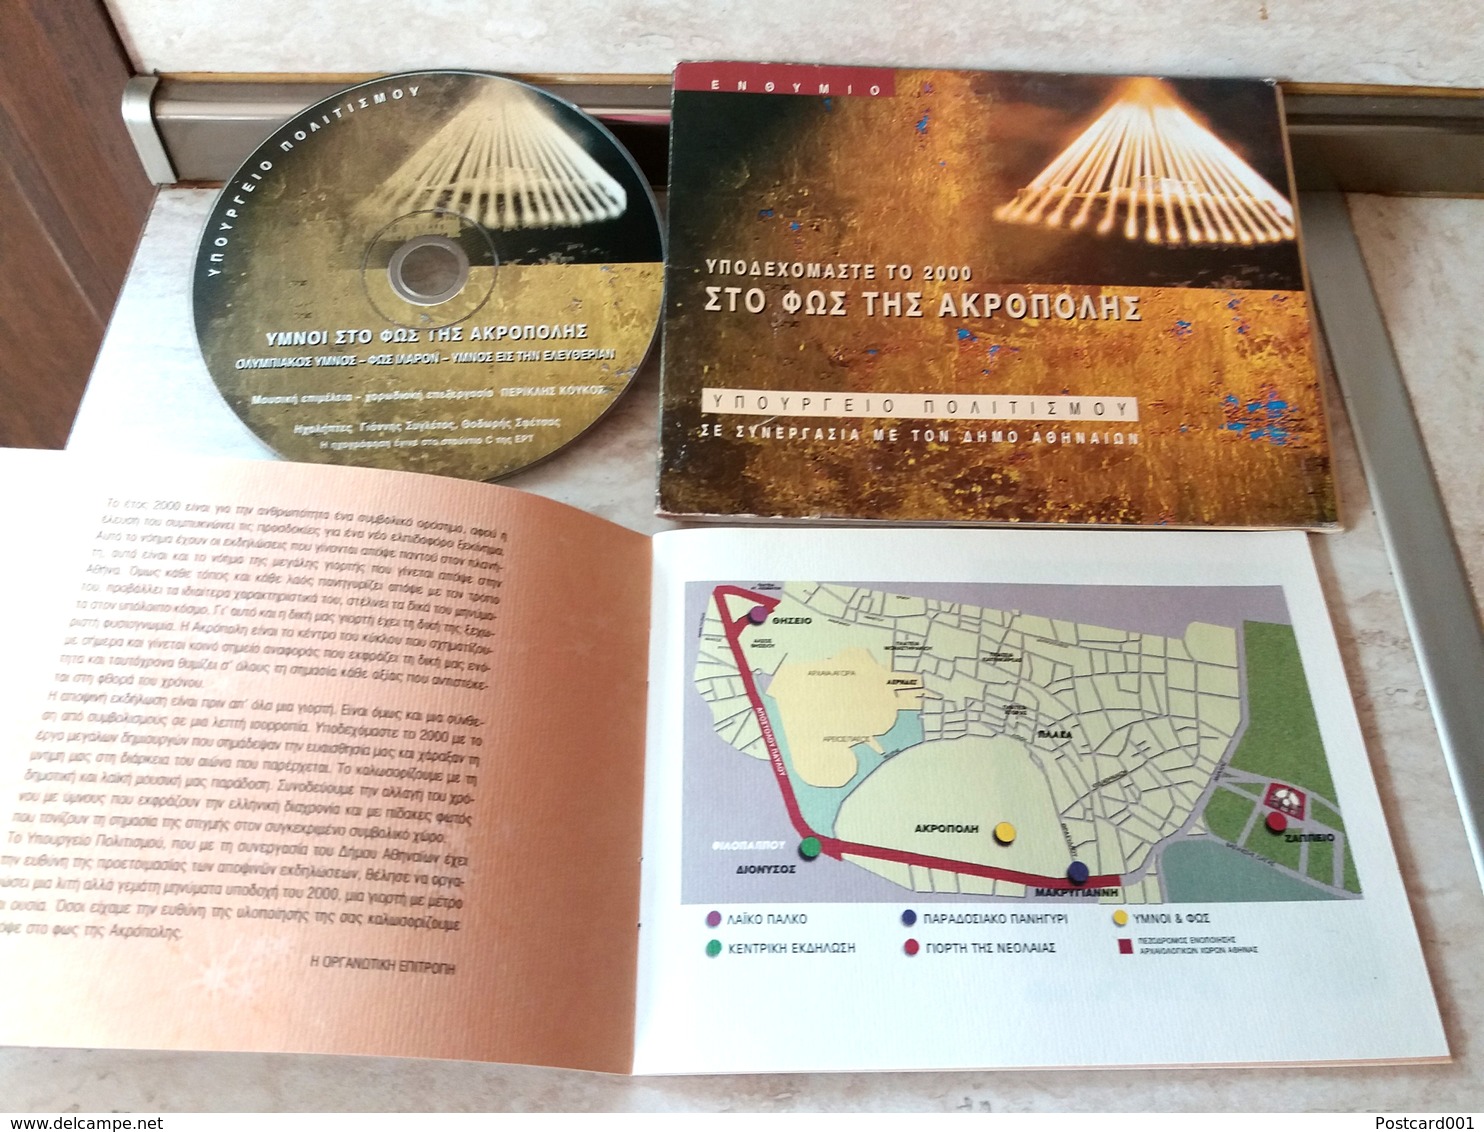 ACROPOLE IN LIGHT AND MUSIC - DVD AND BOOK WITH TEXTS OF GREEK SONGS (2) - Music On DVD